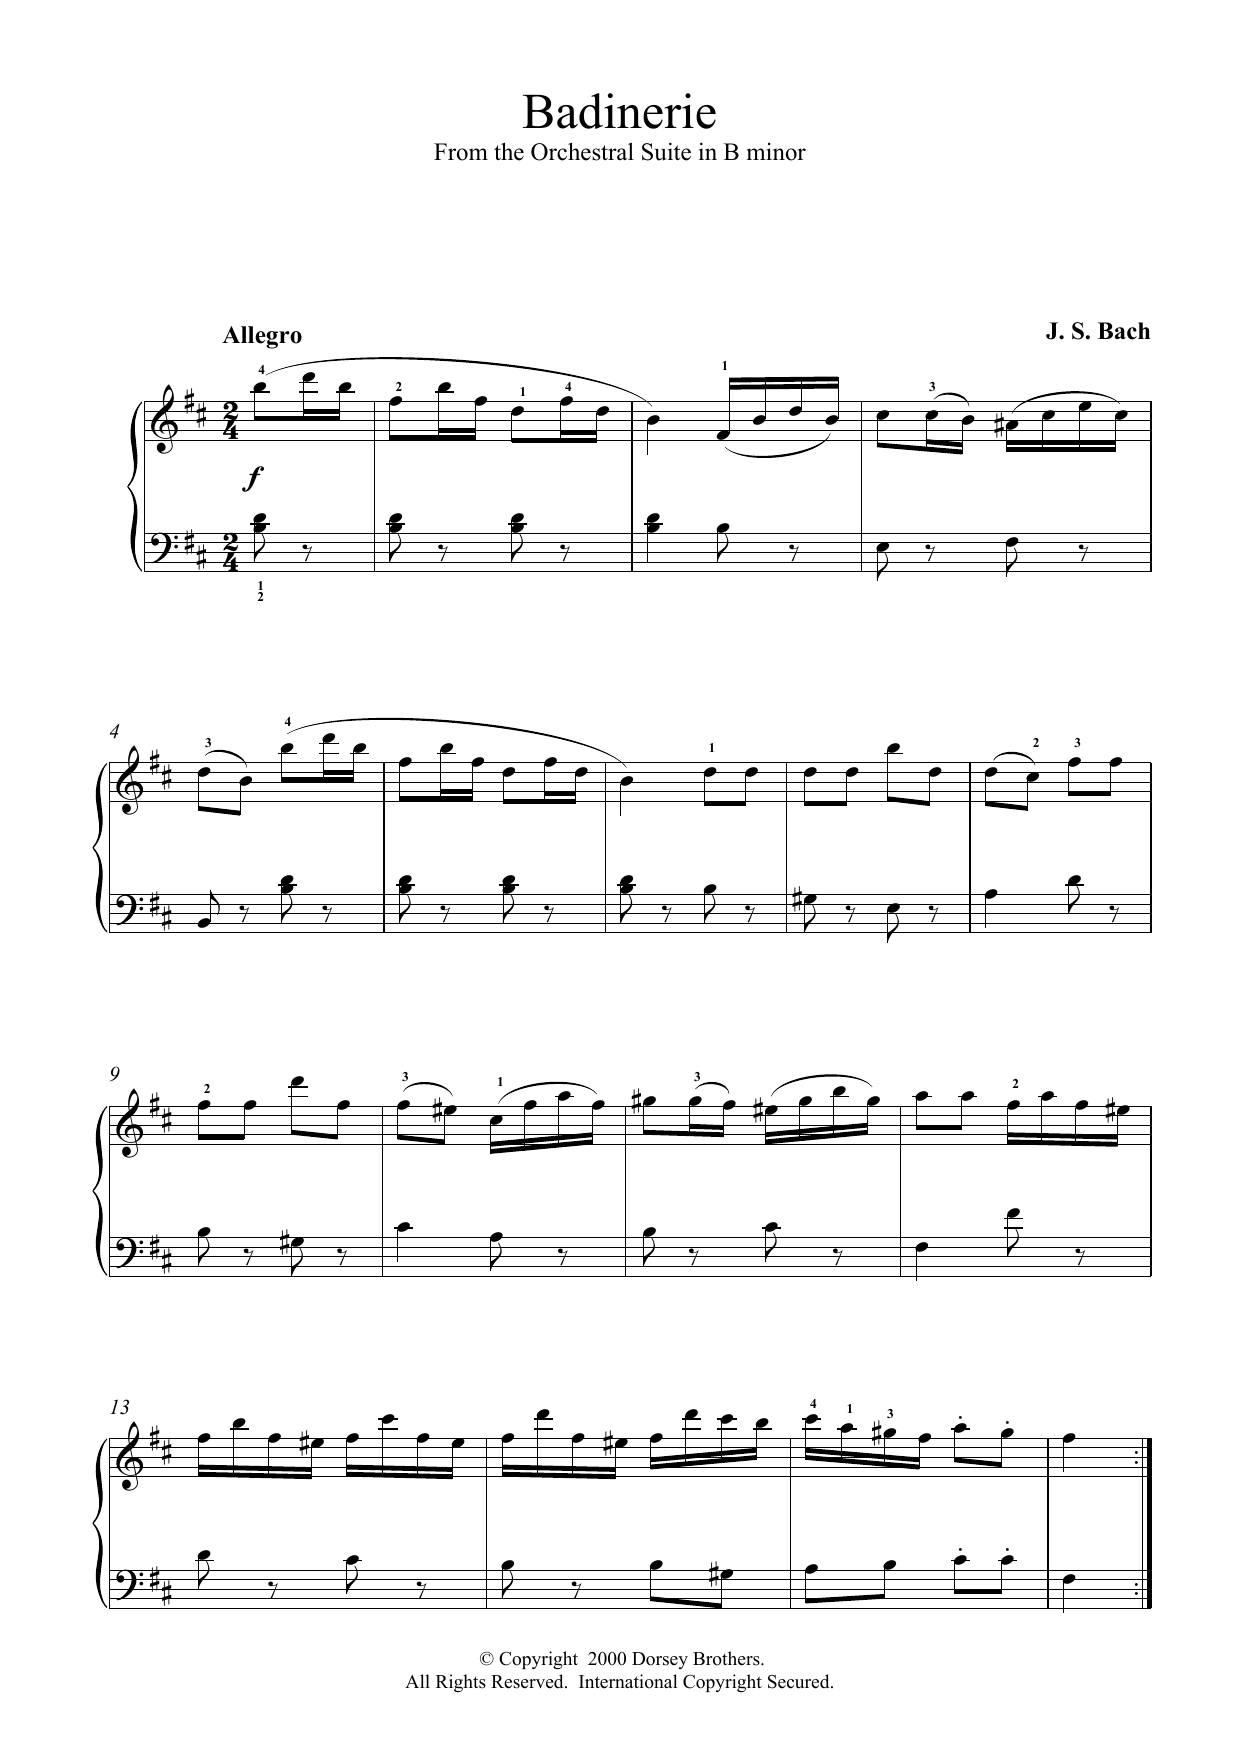 J.S. Bach Badinerie (from Orchestral Suite No. 2 in B Minor) sheet music preview music notes and score for Piano including 2 page(s)